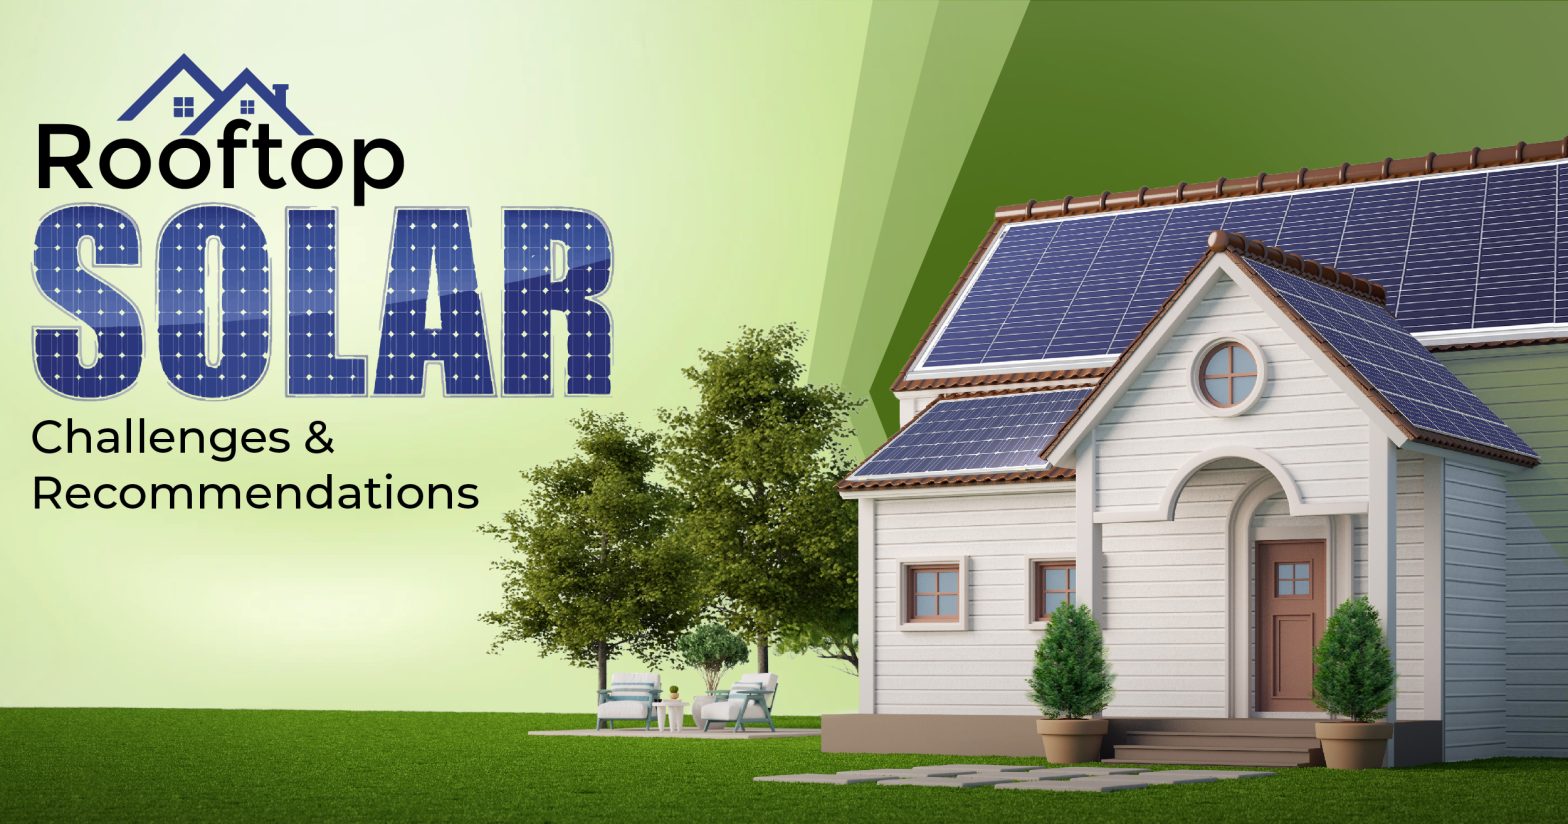 Rooftop Solar Challenges and Recommendations